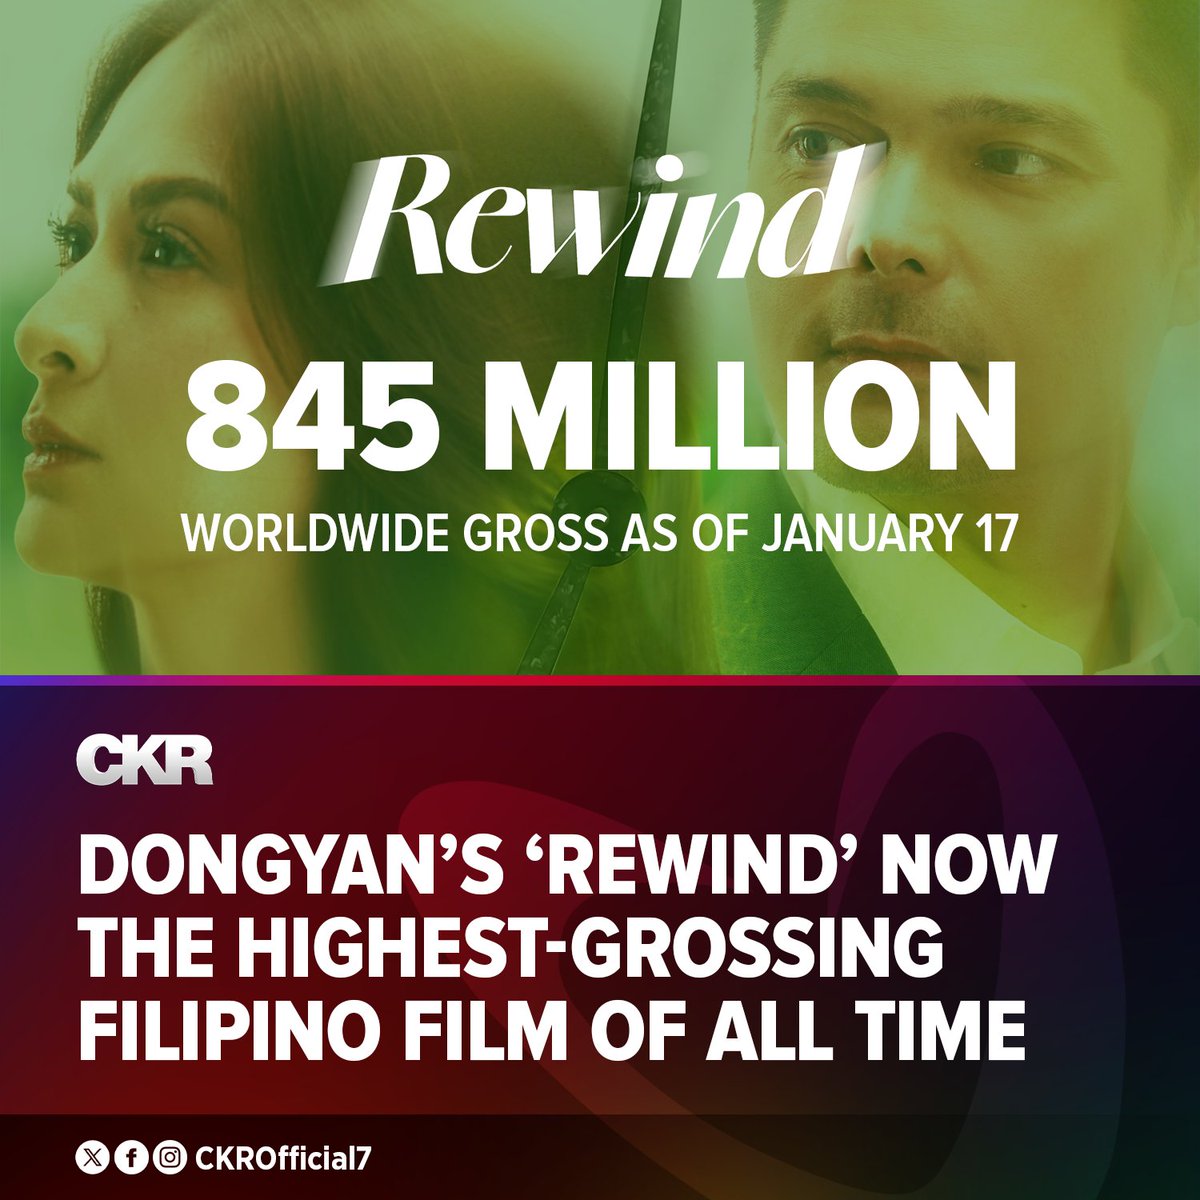 BREAKING: 'Rewind' starring Marian Rivera and Dingdong Dantes is now the highest-grossing Filipino film of all time! The current gross is at 845 Million worldwide as of January 17. #RewindMMFF is still showing over 200 cinemas in the Philippines, USA, Canada, Guam, and Saipan.…